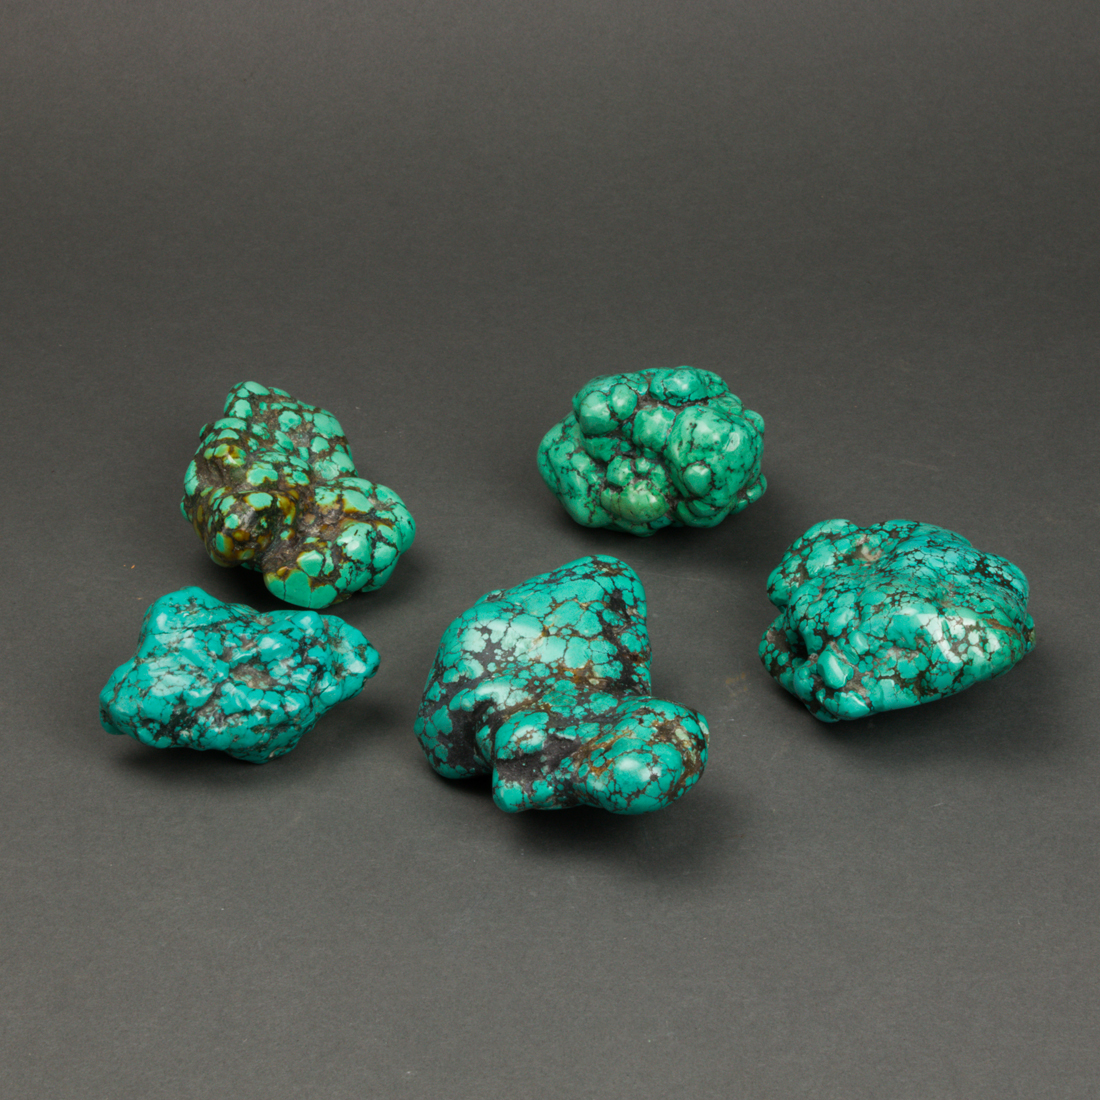 GROUP OF TURQUOISE SPECIMENS Group